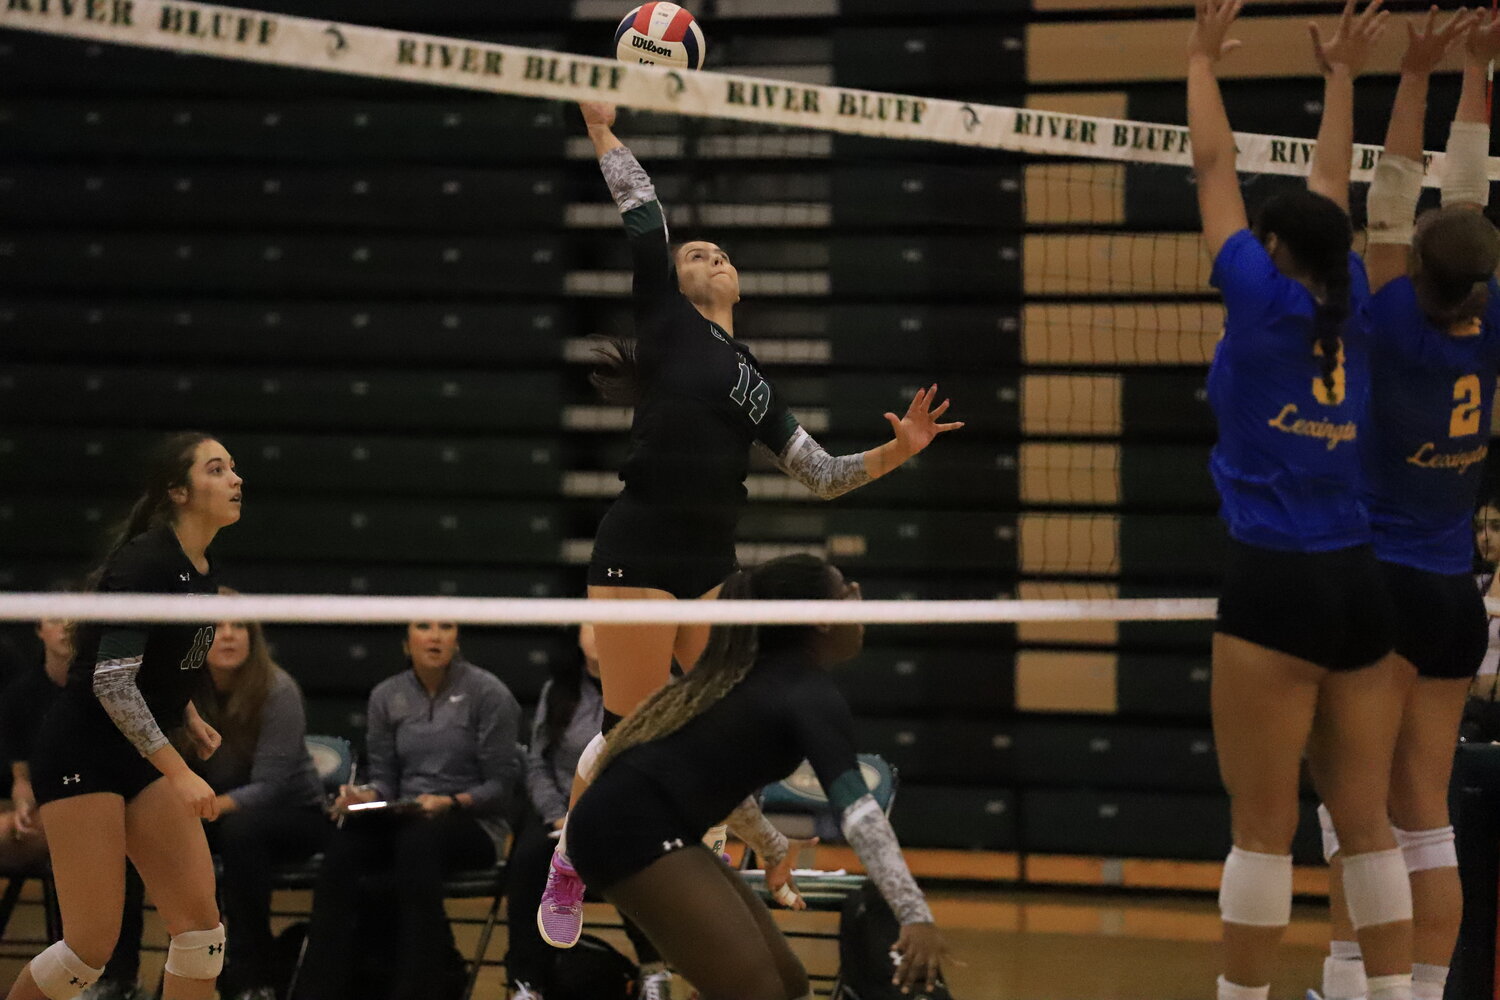 Kylie Wilson tries to get River Bluff back on track during their 3-0 loss at home to Lexington.